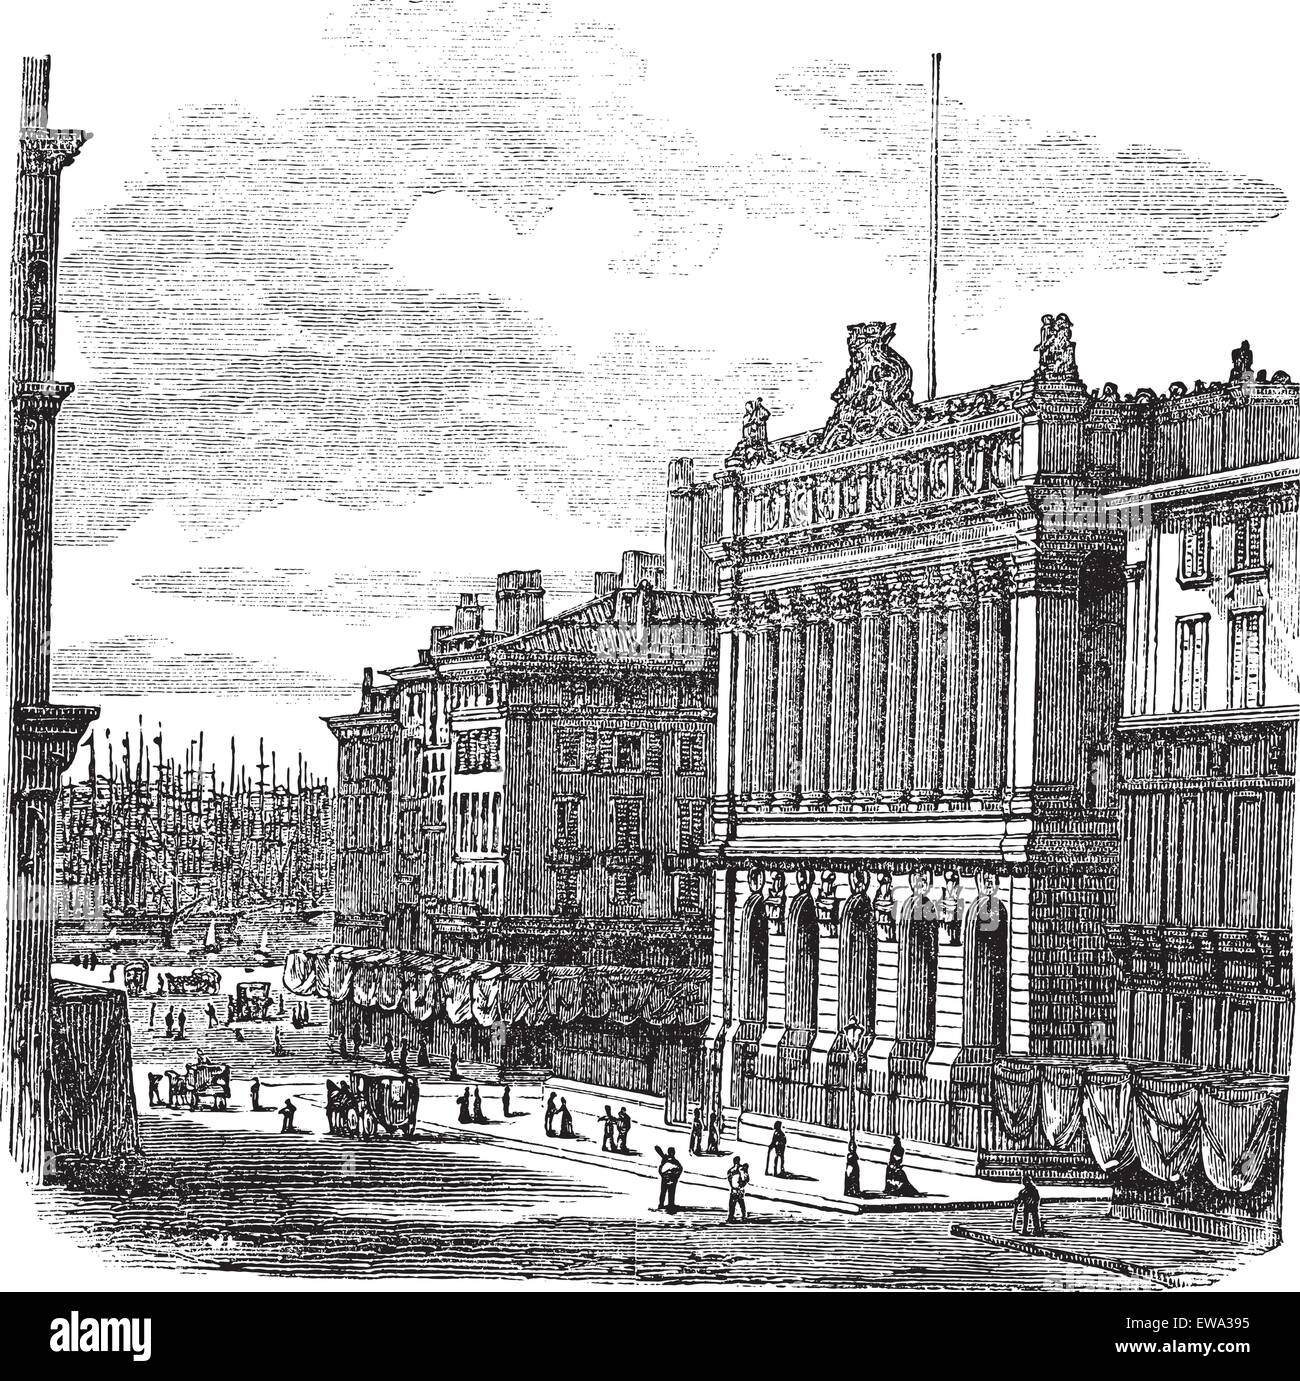 The Bourse Marseille or Palais de la Bourse in Marseille, France, during the 1890s, vintage engraving. Old engraved illustration of the Bourse Marseille with people on the street. Stock Vector